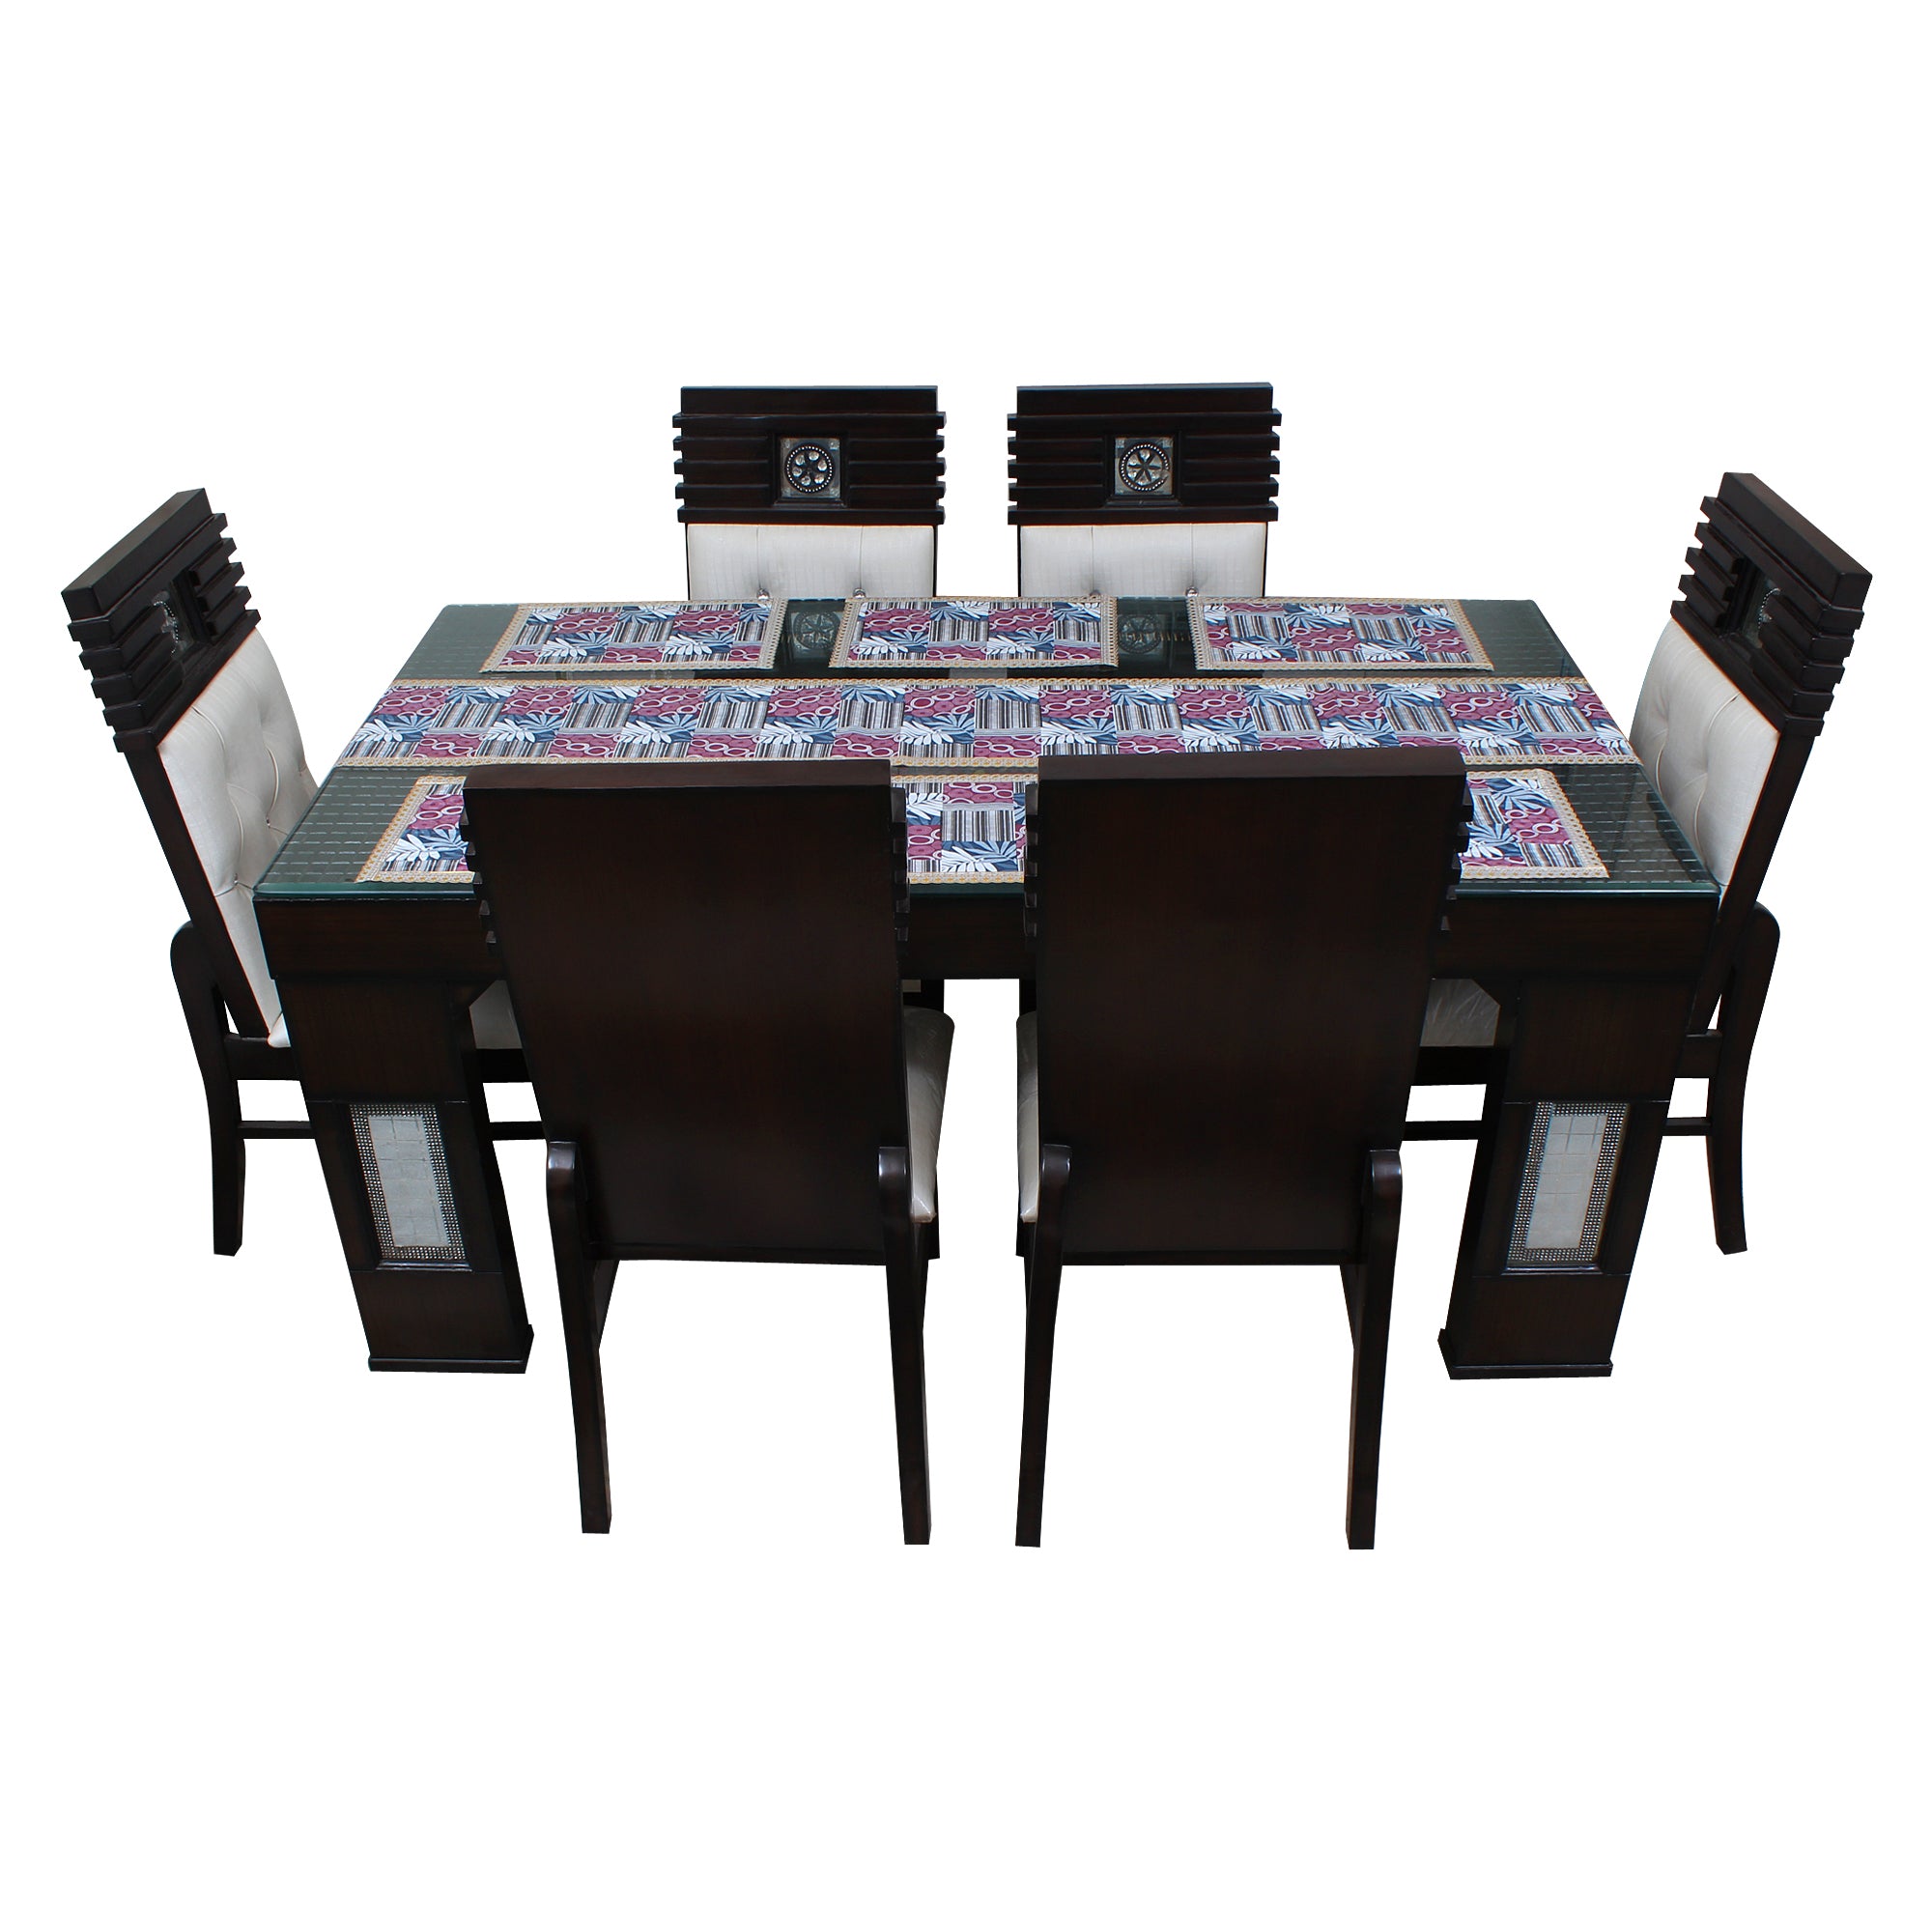 Waterproof & Dustproof Dining Table Runner With 6 Placemats, SA25 - Dream Care Furnishings Private Limited